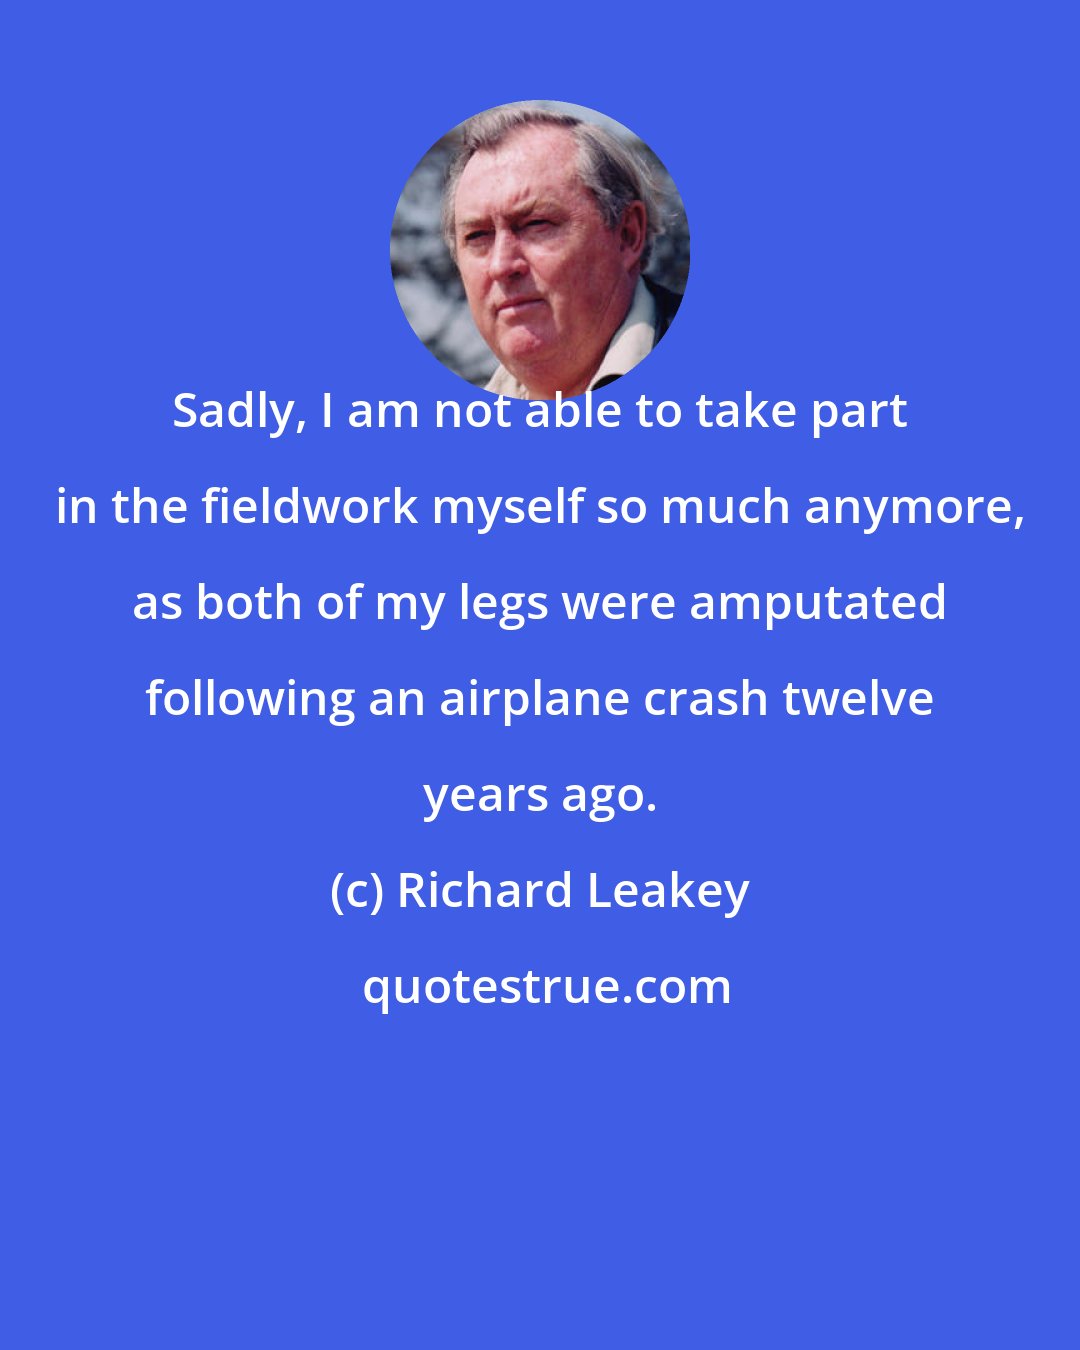 Richard Leakey: Sadly, I am not able to take part in the fieldwork myself so much anymore, as both of my legs were amputated following an airplane crash twelve years ago.